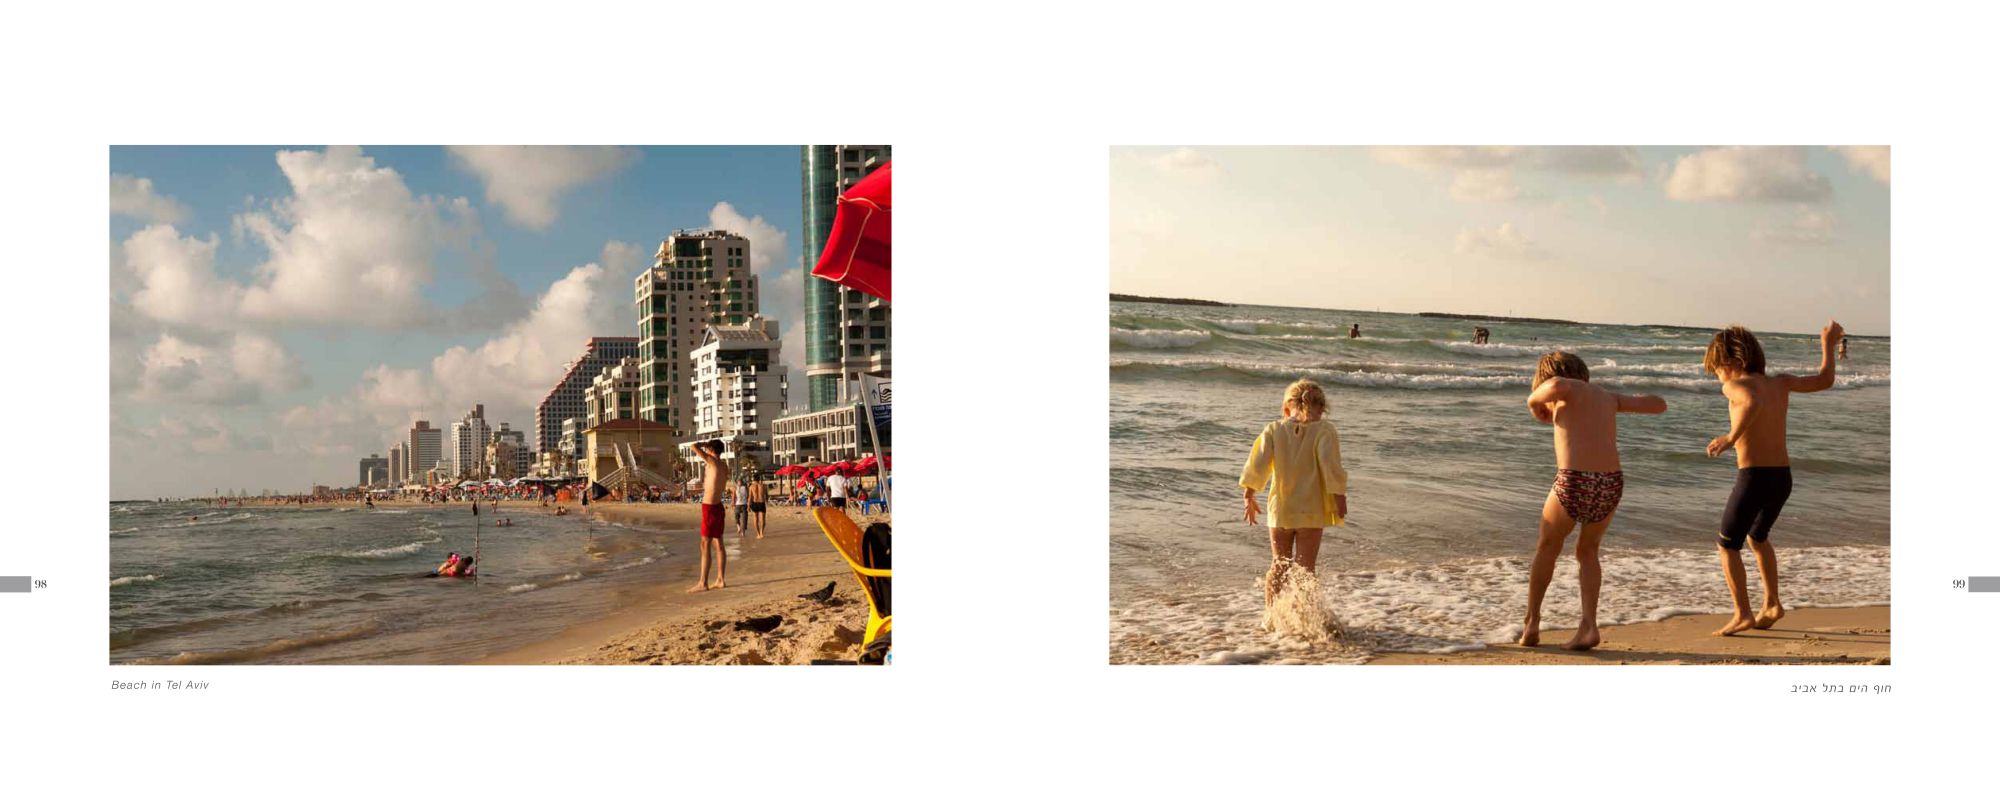 Page 98: Tel-Aviv Beach Front/Page 99: Children at the Beach